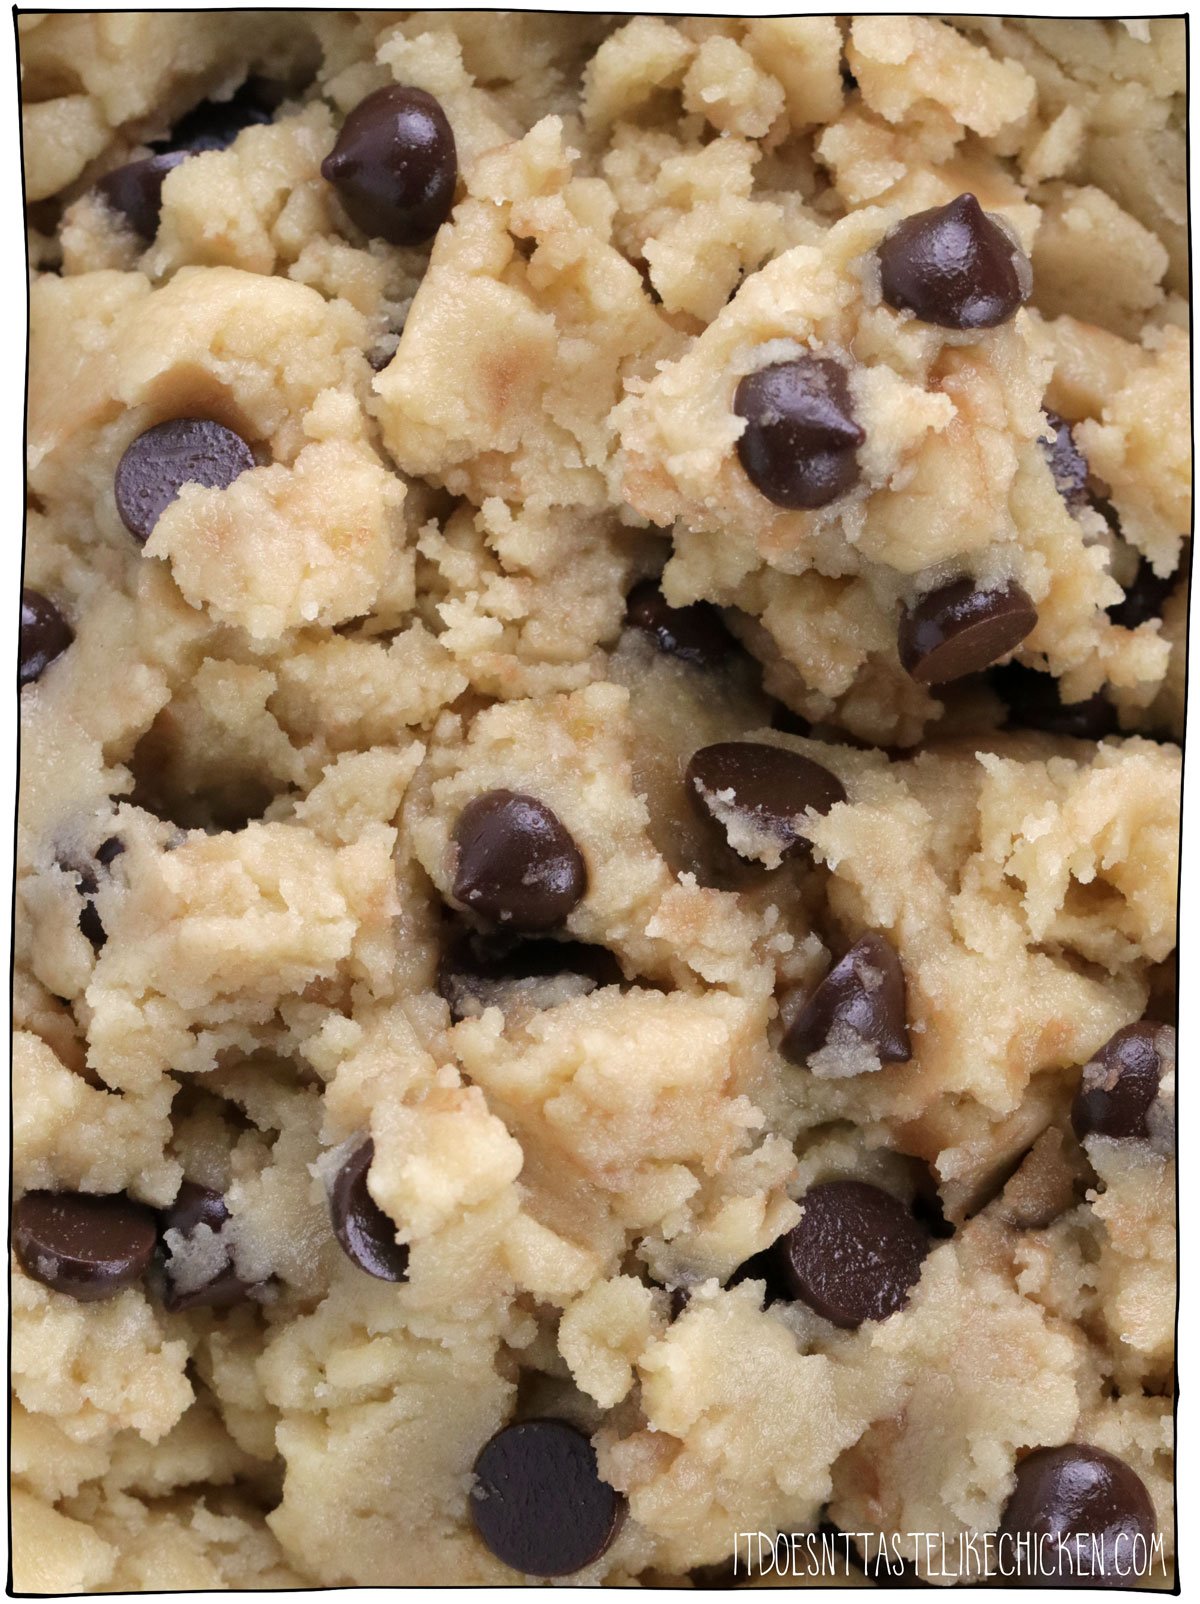 Just 7 ingredients and 6 minutes and you could be enjoying spoonfuls of this delicious vegan cookie dough! Skip forming and baking cookies and just give me that batter! #itdoesnttastelikechicken #vegandesserts